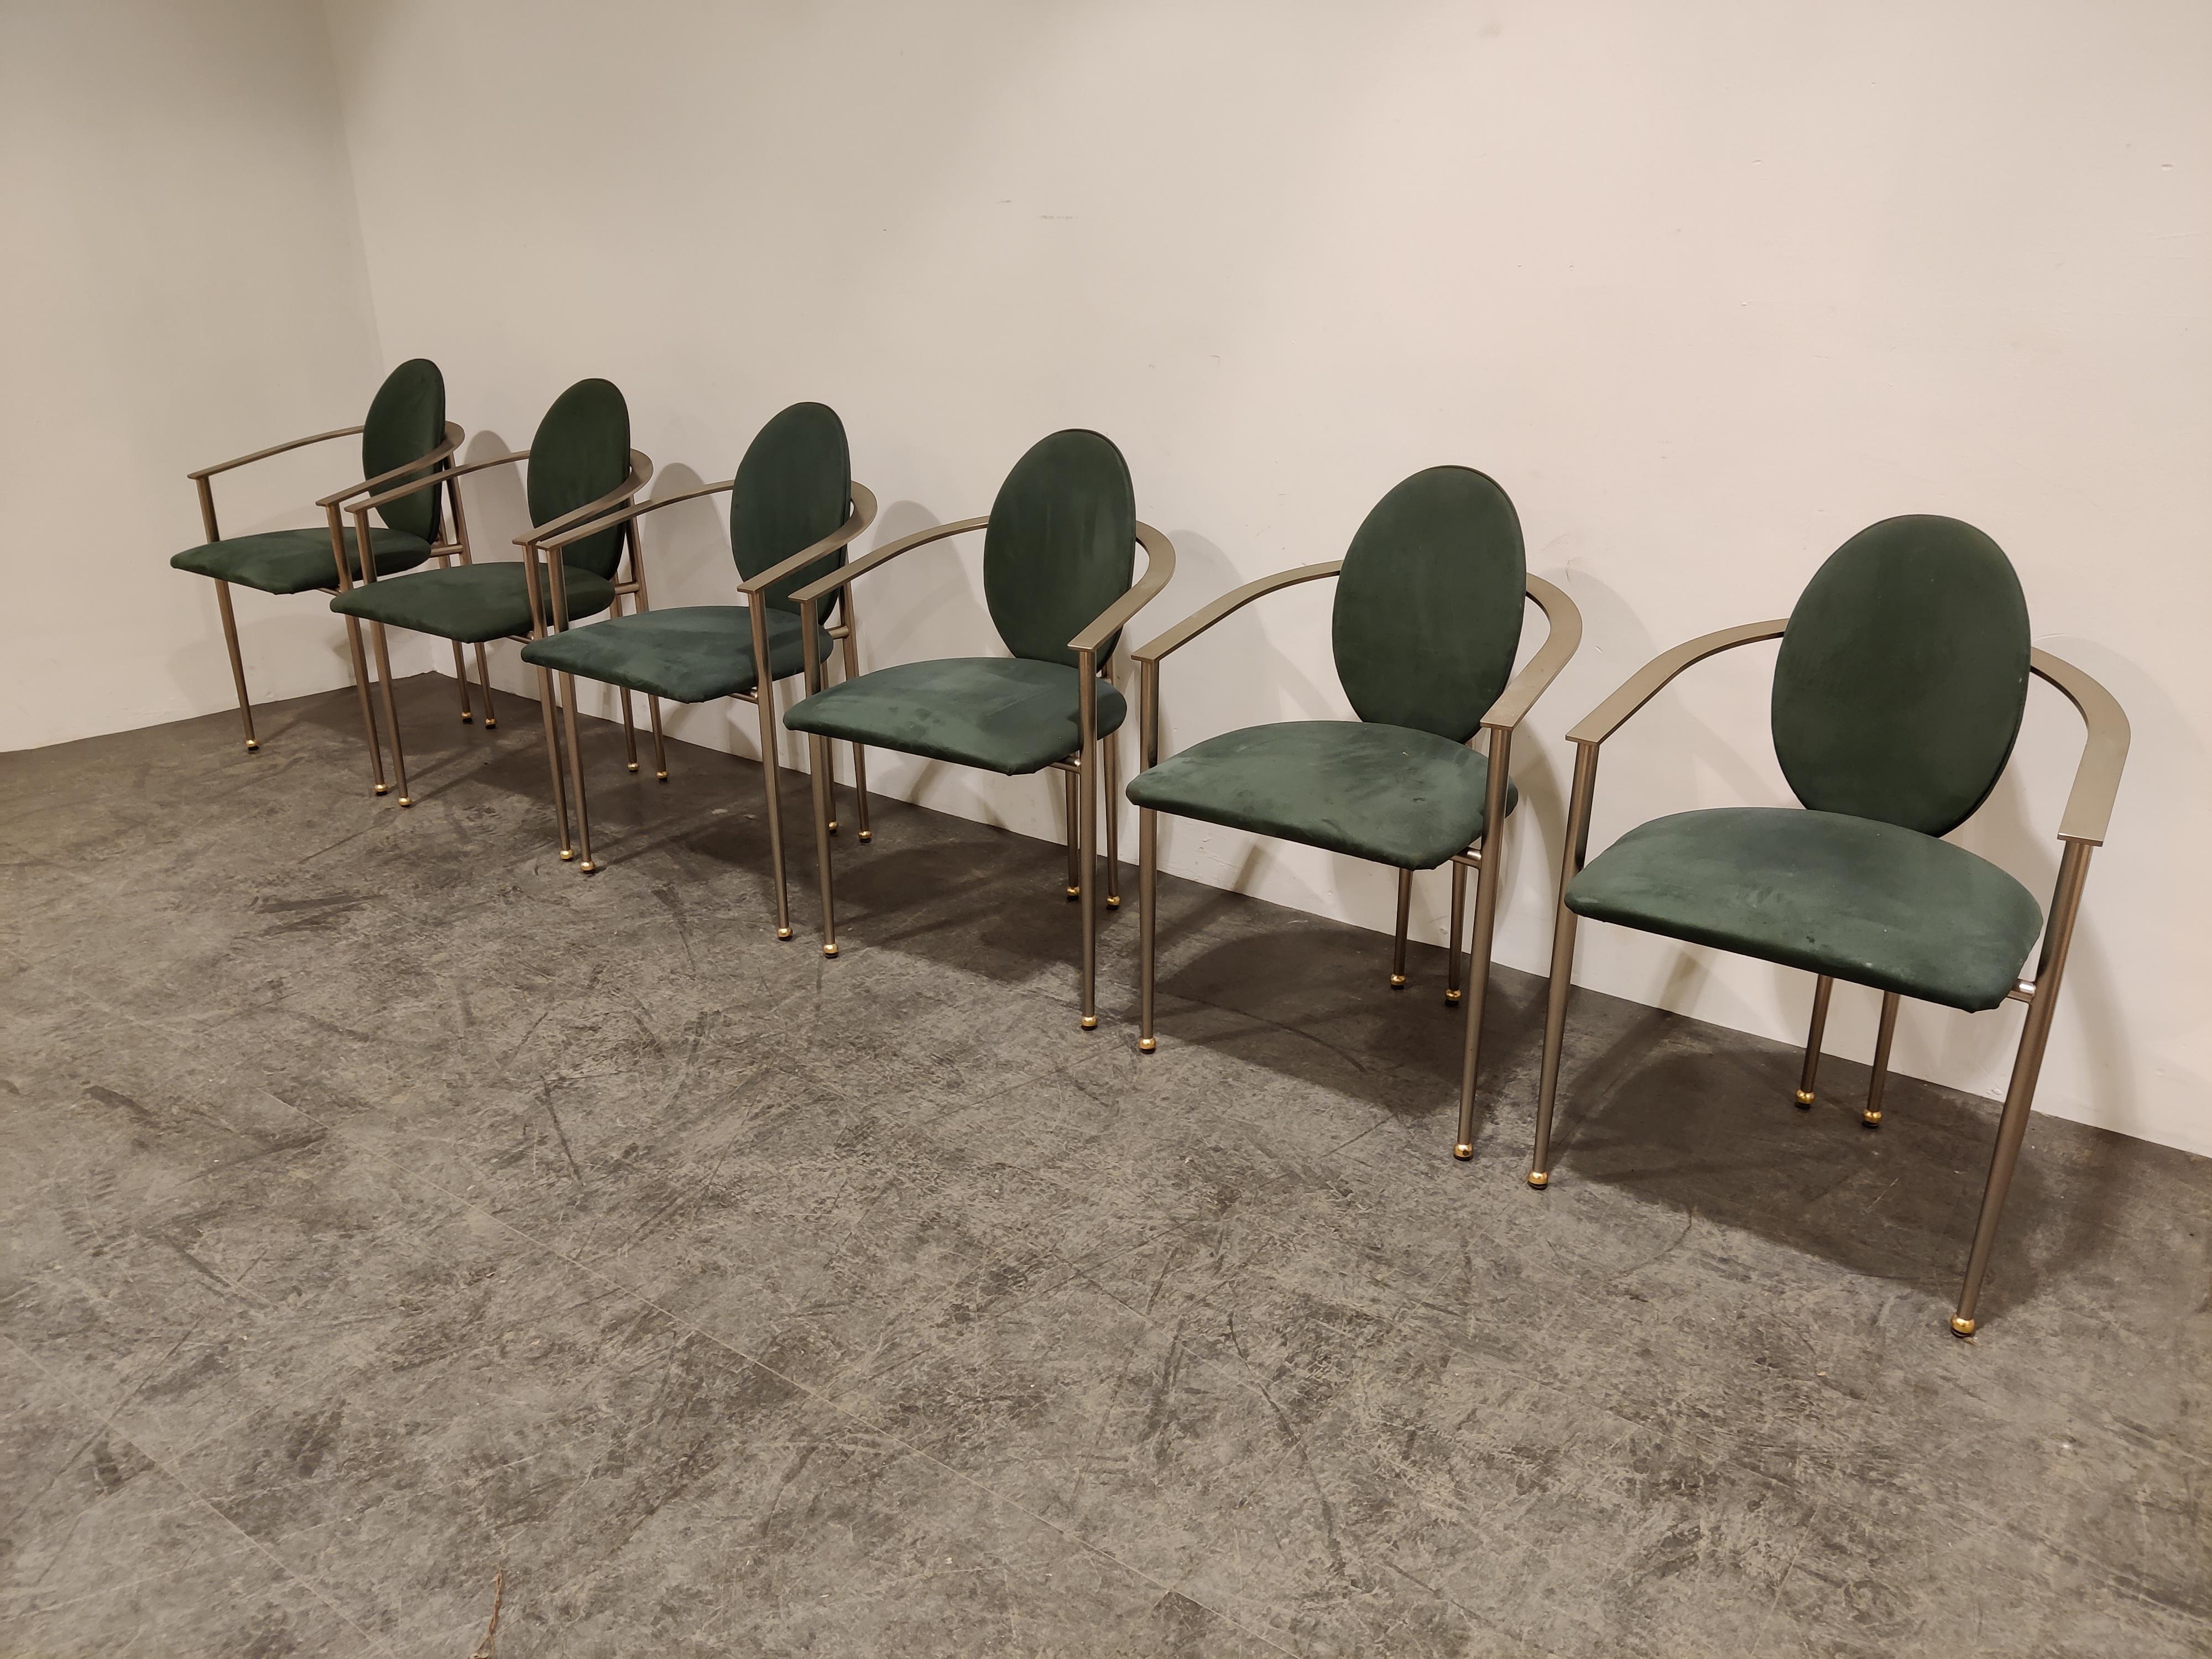 Set of six elegant dining room chairs manufactured by Belgochrom.

Nicely designed brushed steel frames with a brass shine and elegant legs. Uphosltered in green alcantara.

Belgochrom used to produce high end furniture and was the higher